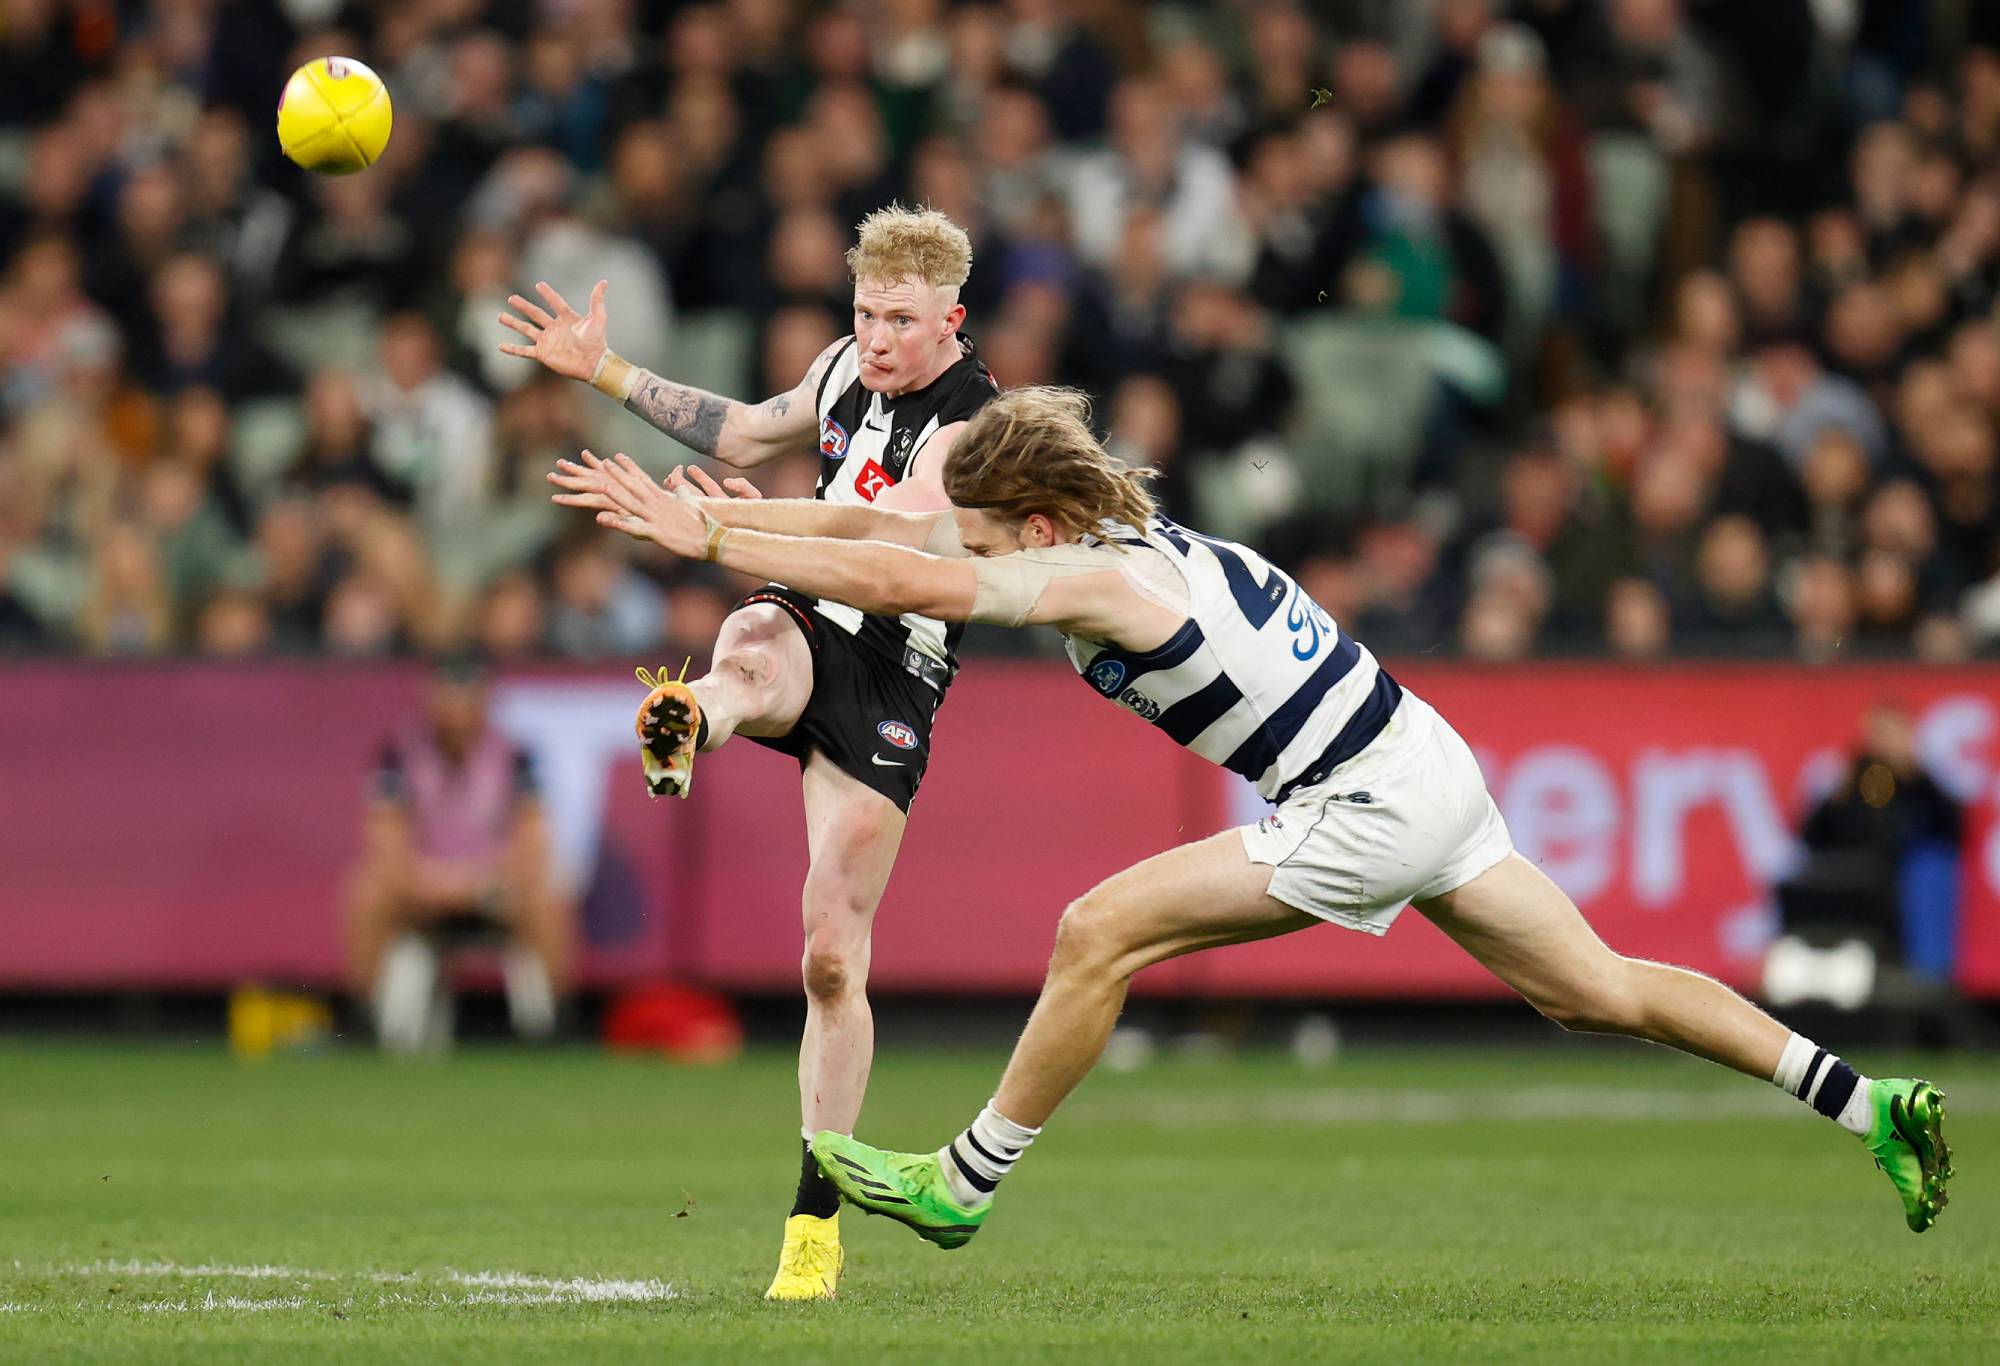 MELBOURNE, AUSTRALIA - SEPTEMBER 03: John Noble of the Magpies and Cameron Guthrie of the Cats in action during the 2022 AFL First Qualifying Final match between the Geelong Cats and the Collingwood Magpies at the Melbourne Cricket Ground on September 3, 2022 in Melbourne, Australia .  (Photo by Michael Willson/AFL Photos via Getty Images)